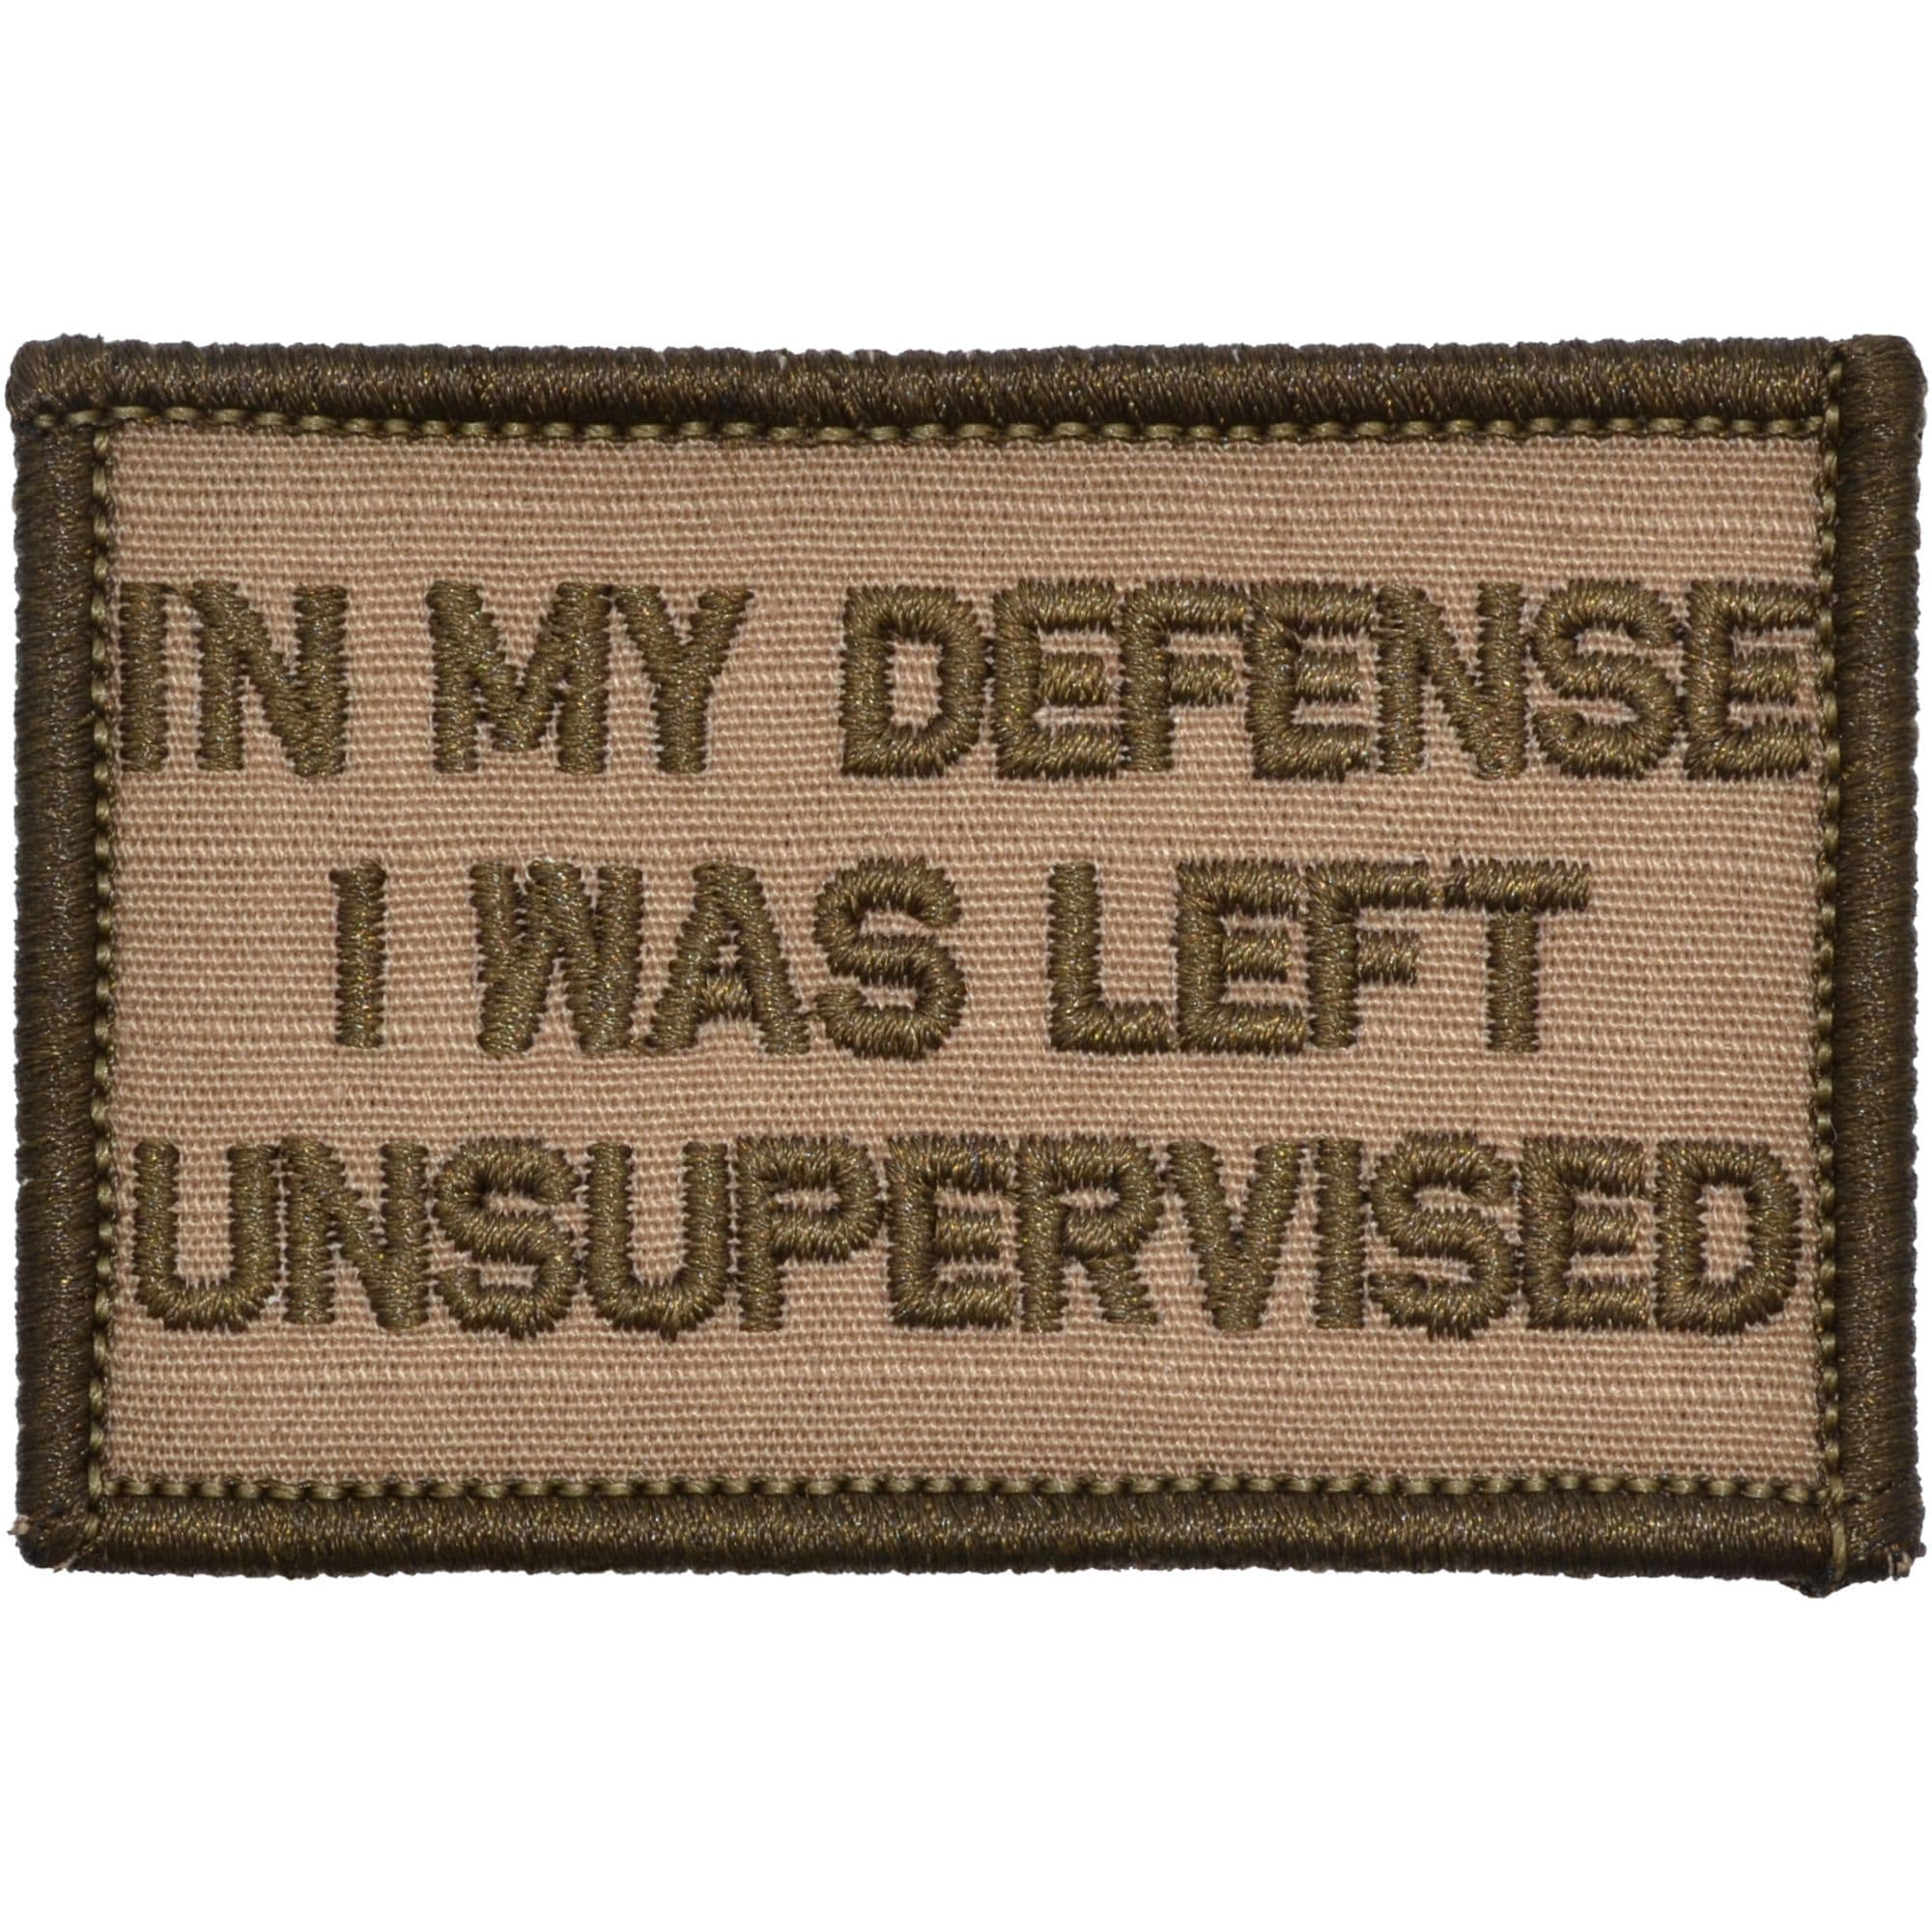 Tactical Gear Junkie Patches Coyote Brown In My Defense I Was Left Unsupervised - 2x3 Patch